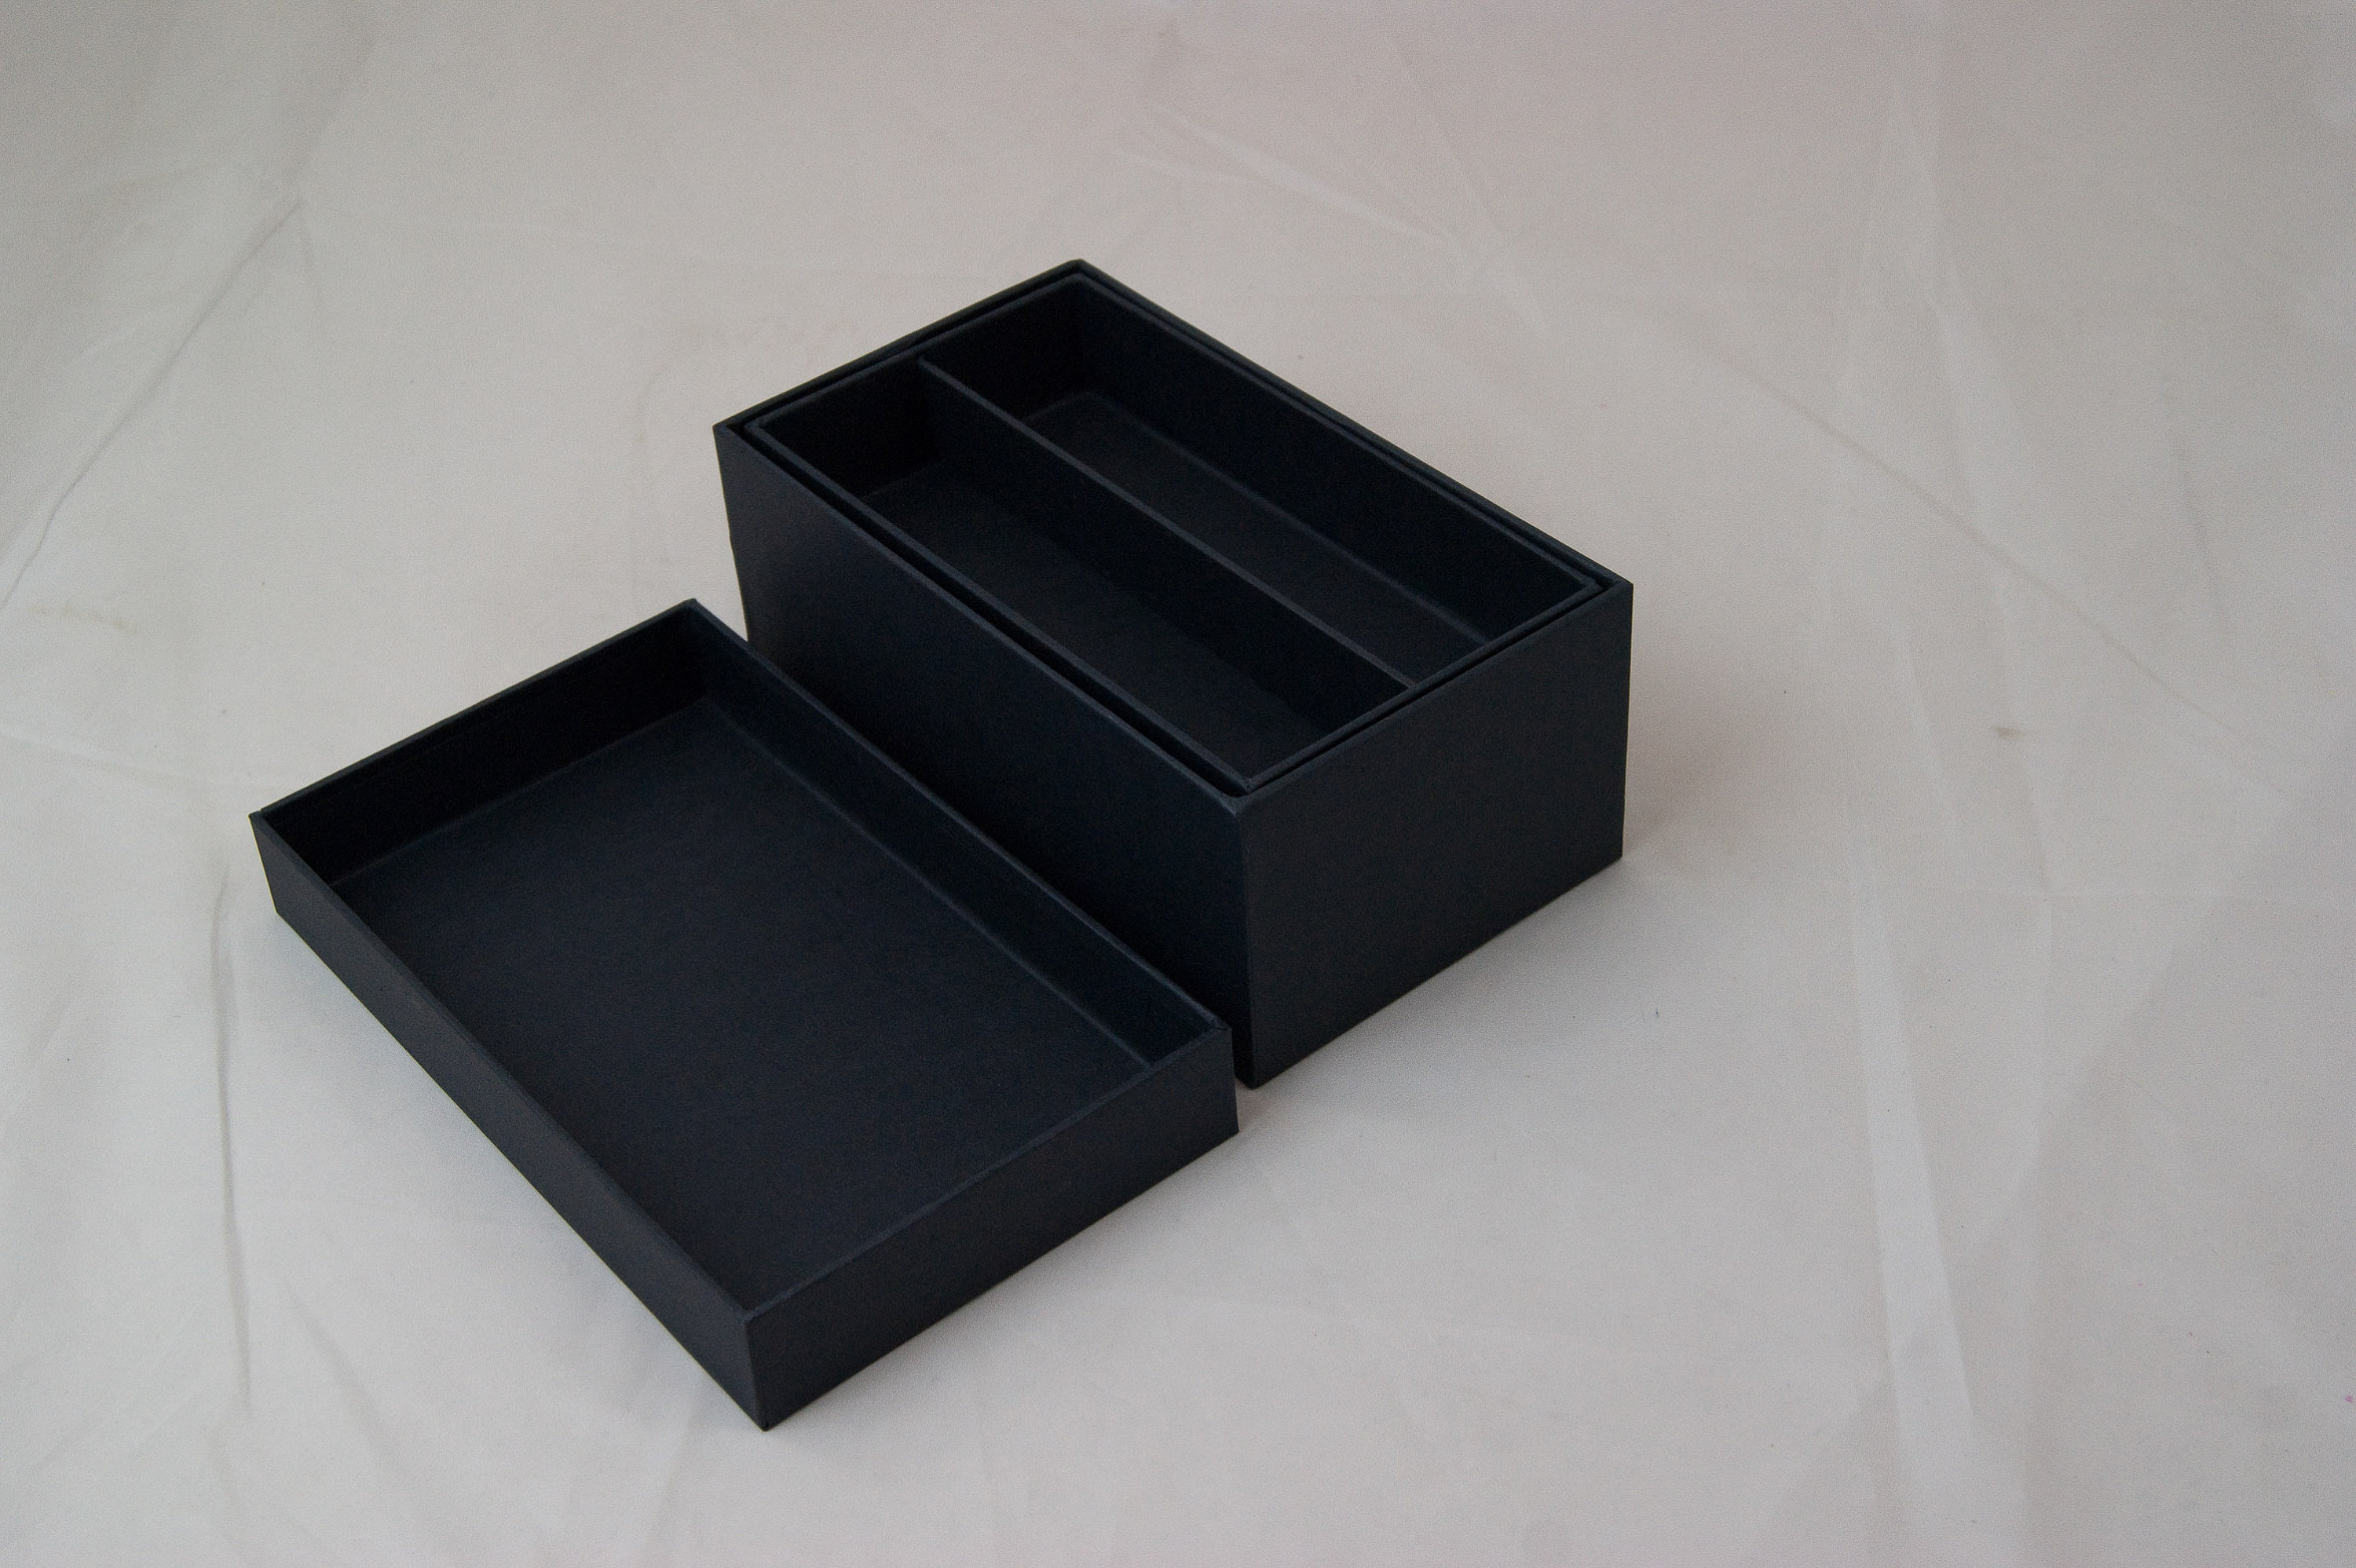 2 Pieces Jewel Case Storage Box with Lids Home Decor Supplies Women Gift 